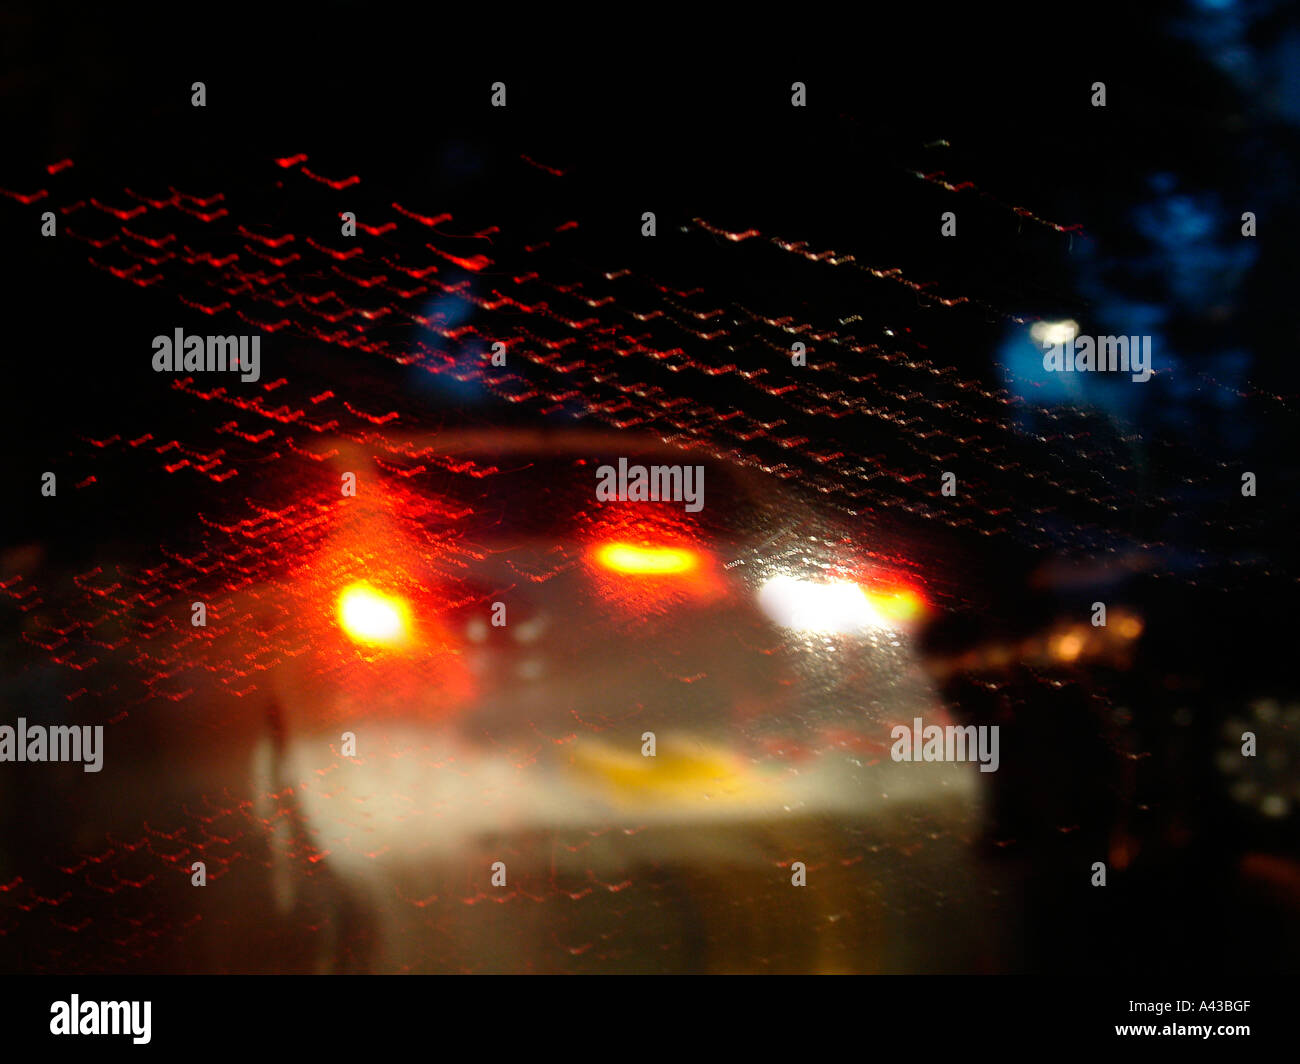 Blurred vision as seen through front car wind shield on a rainy night Stock Photo